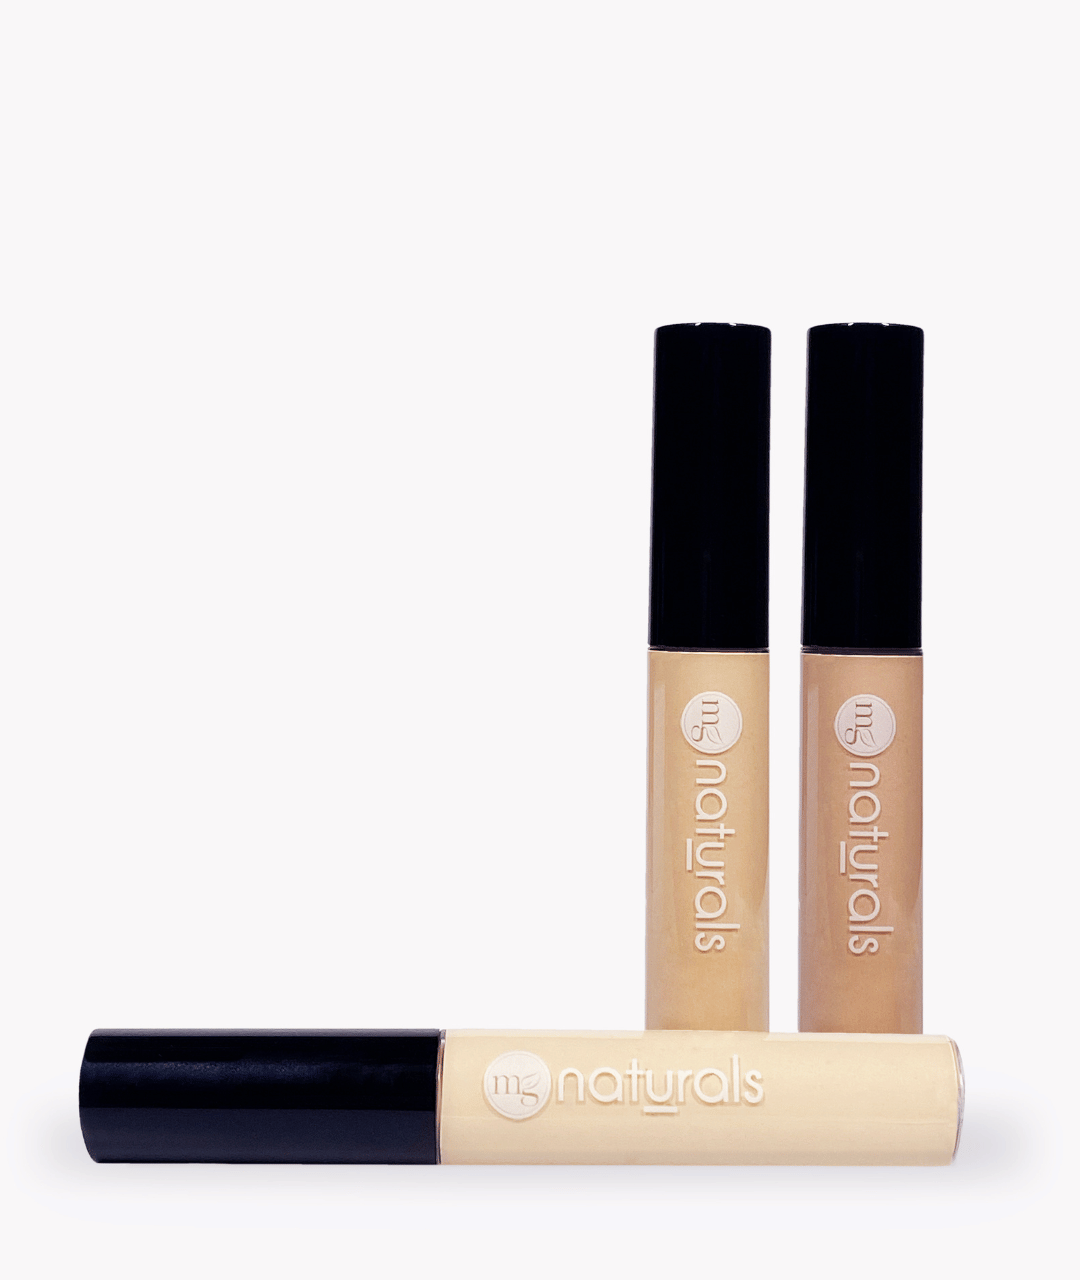 Pretty by Flormar Perfect Coverage Liquid Concealer ingredients (Explained)